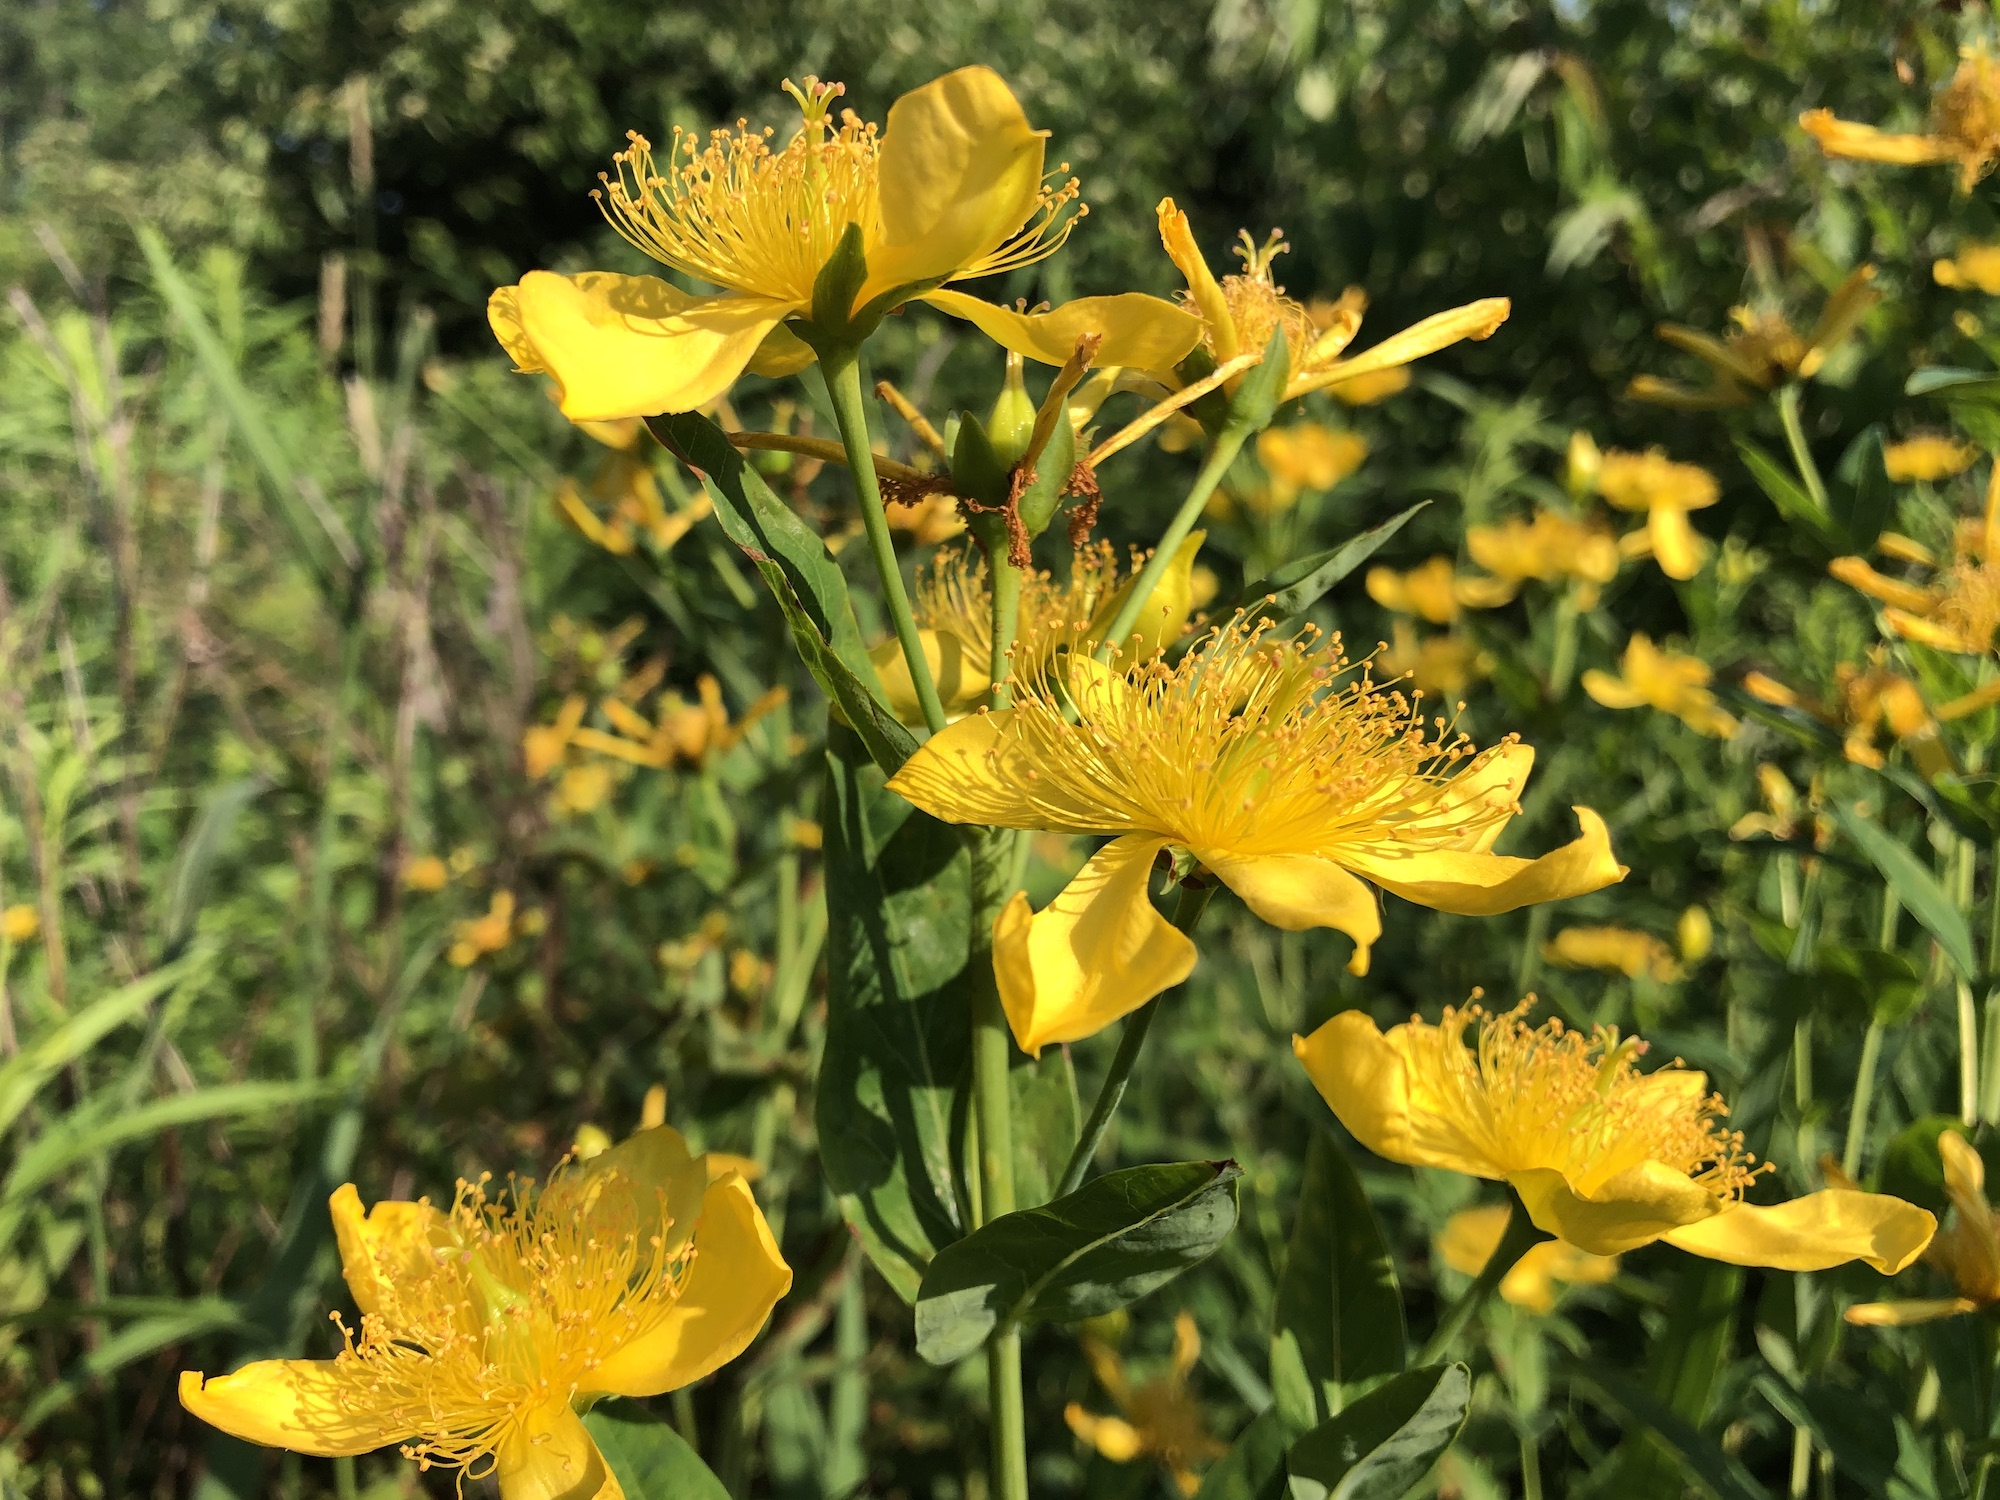 Great St. John's wort on bank of Marion Dunn Pond on July 7, 2019.